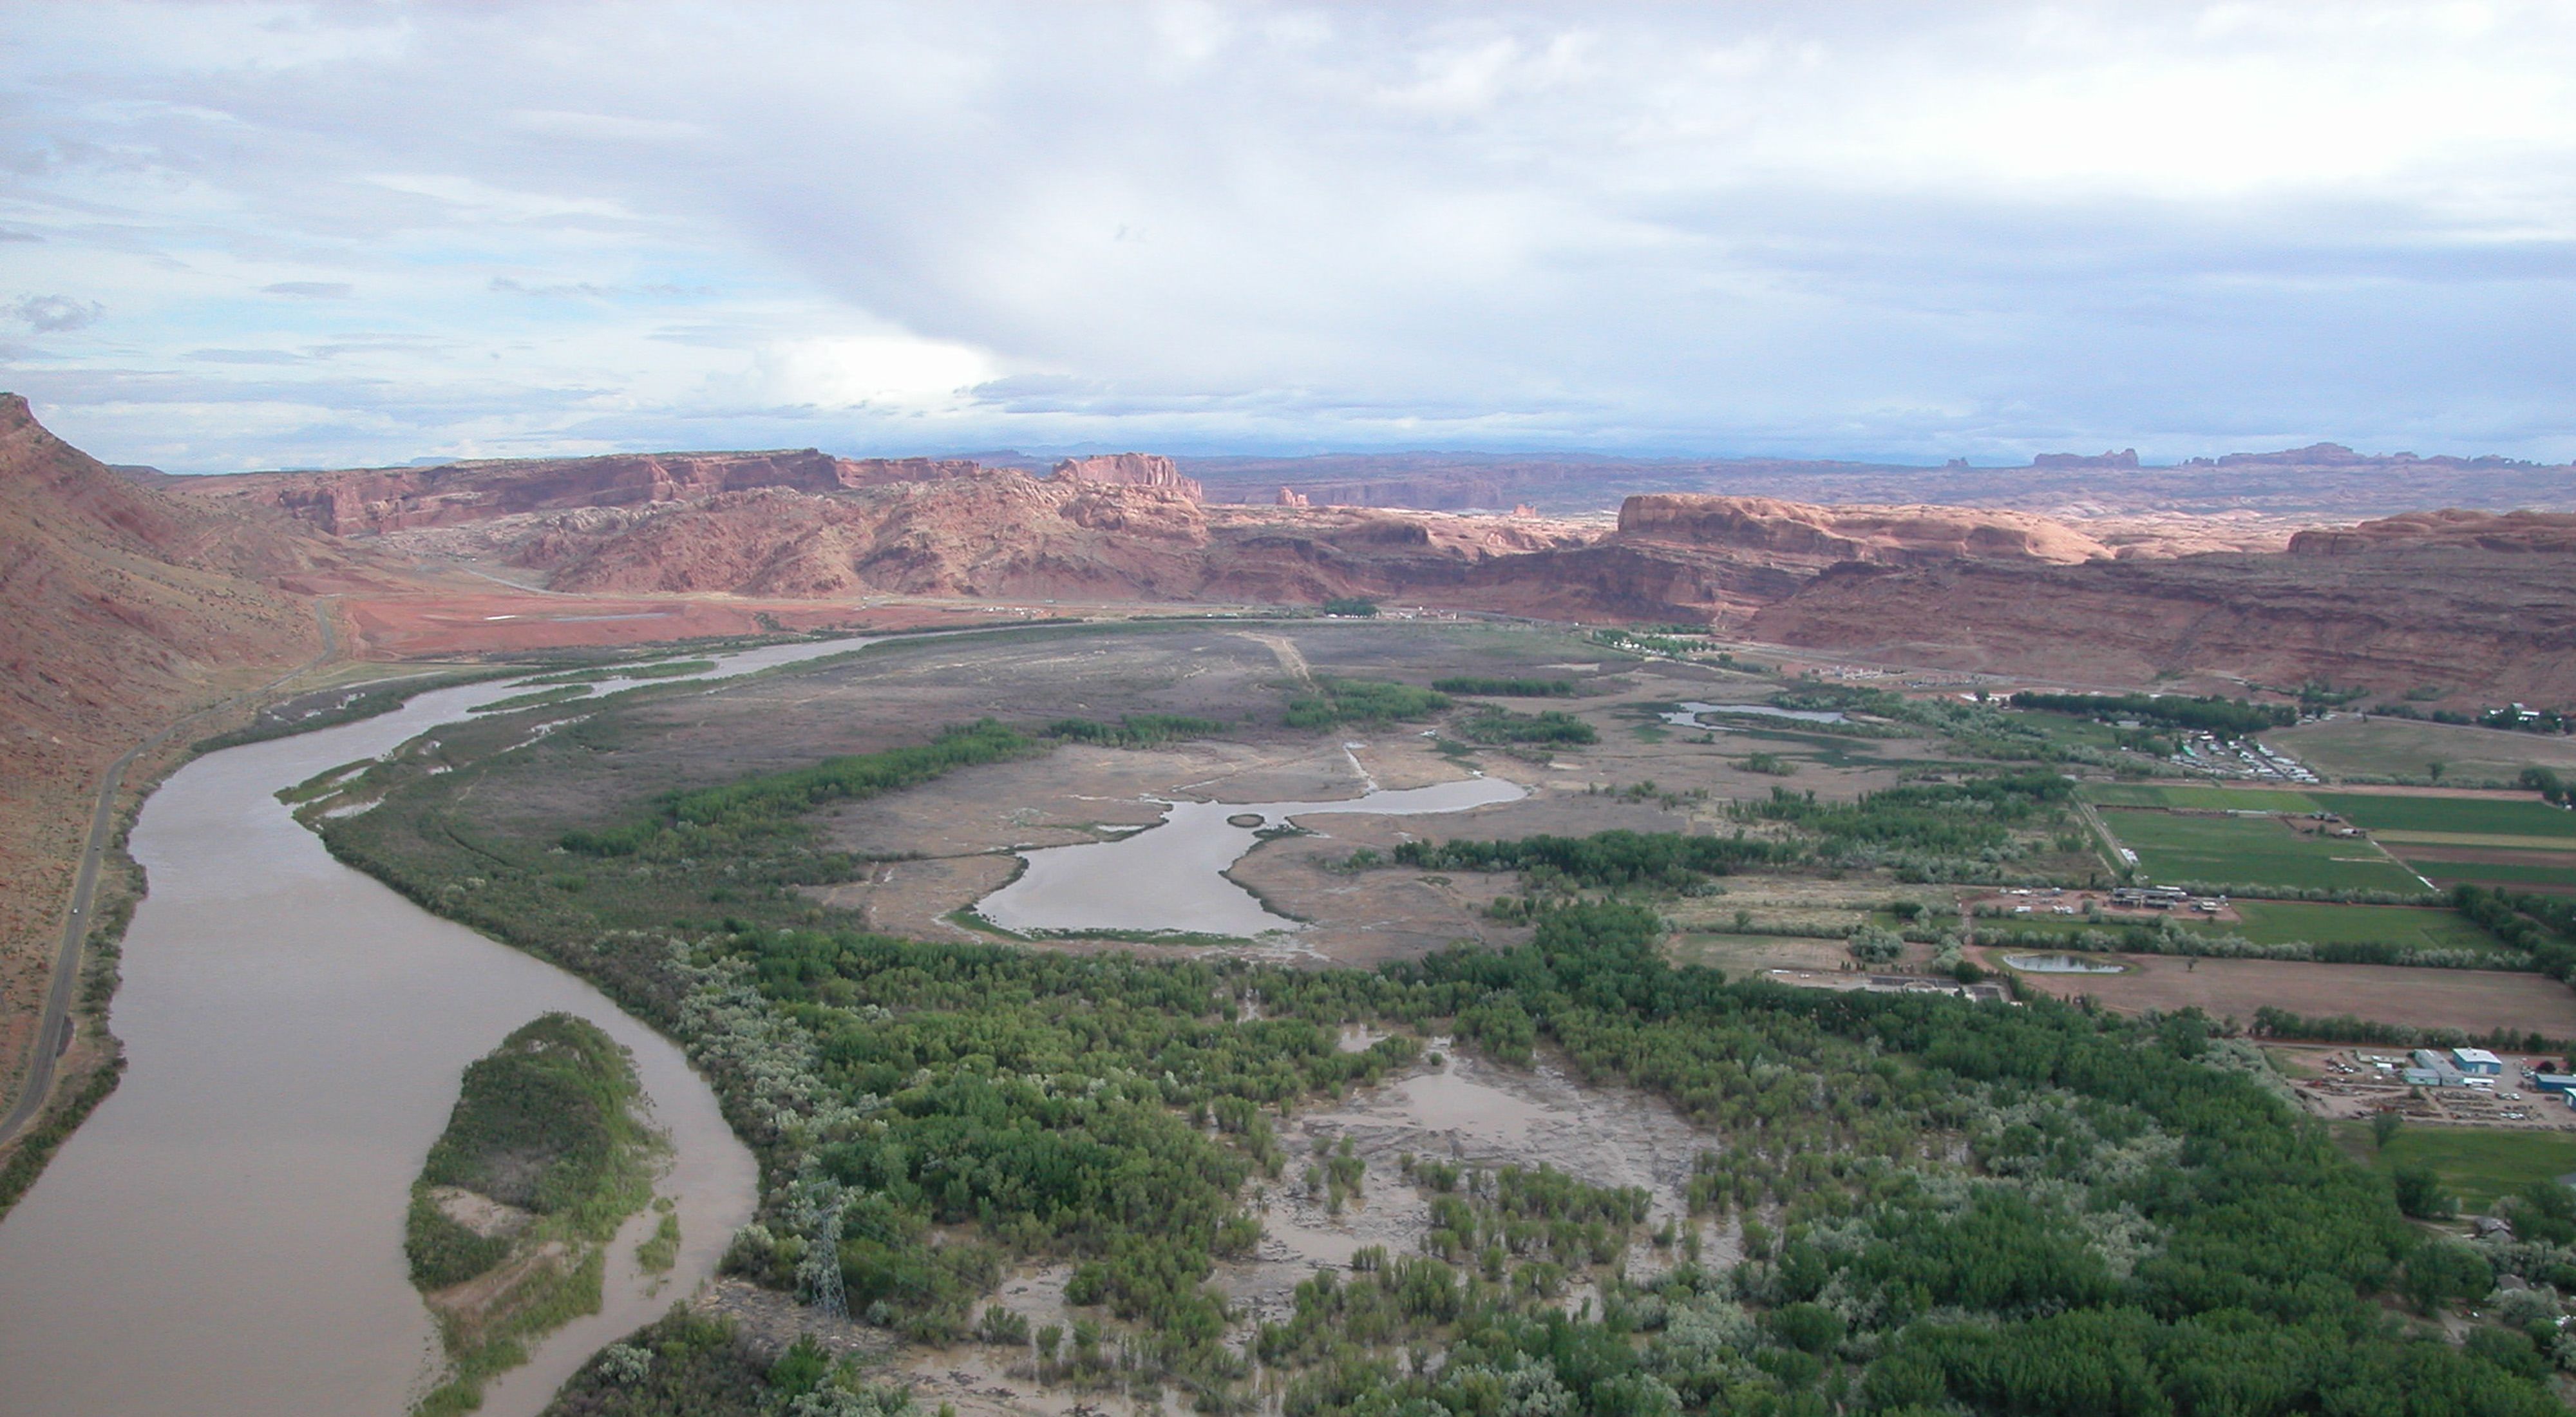 An aerial view of a semi-flooded Colorado River surrounded by red rocks.